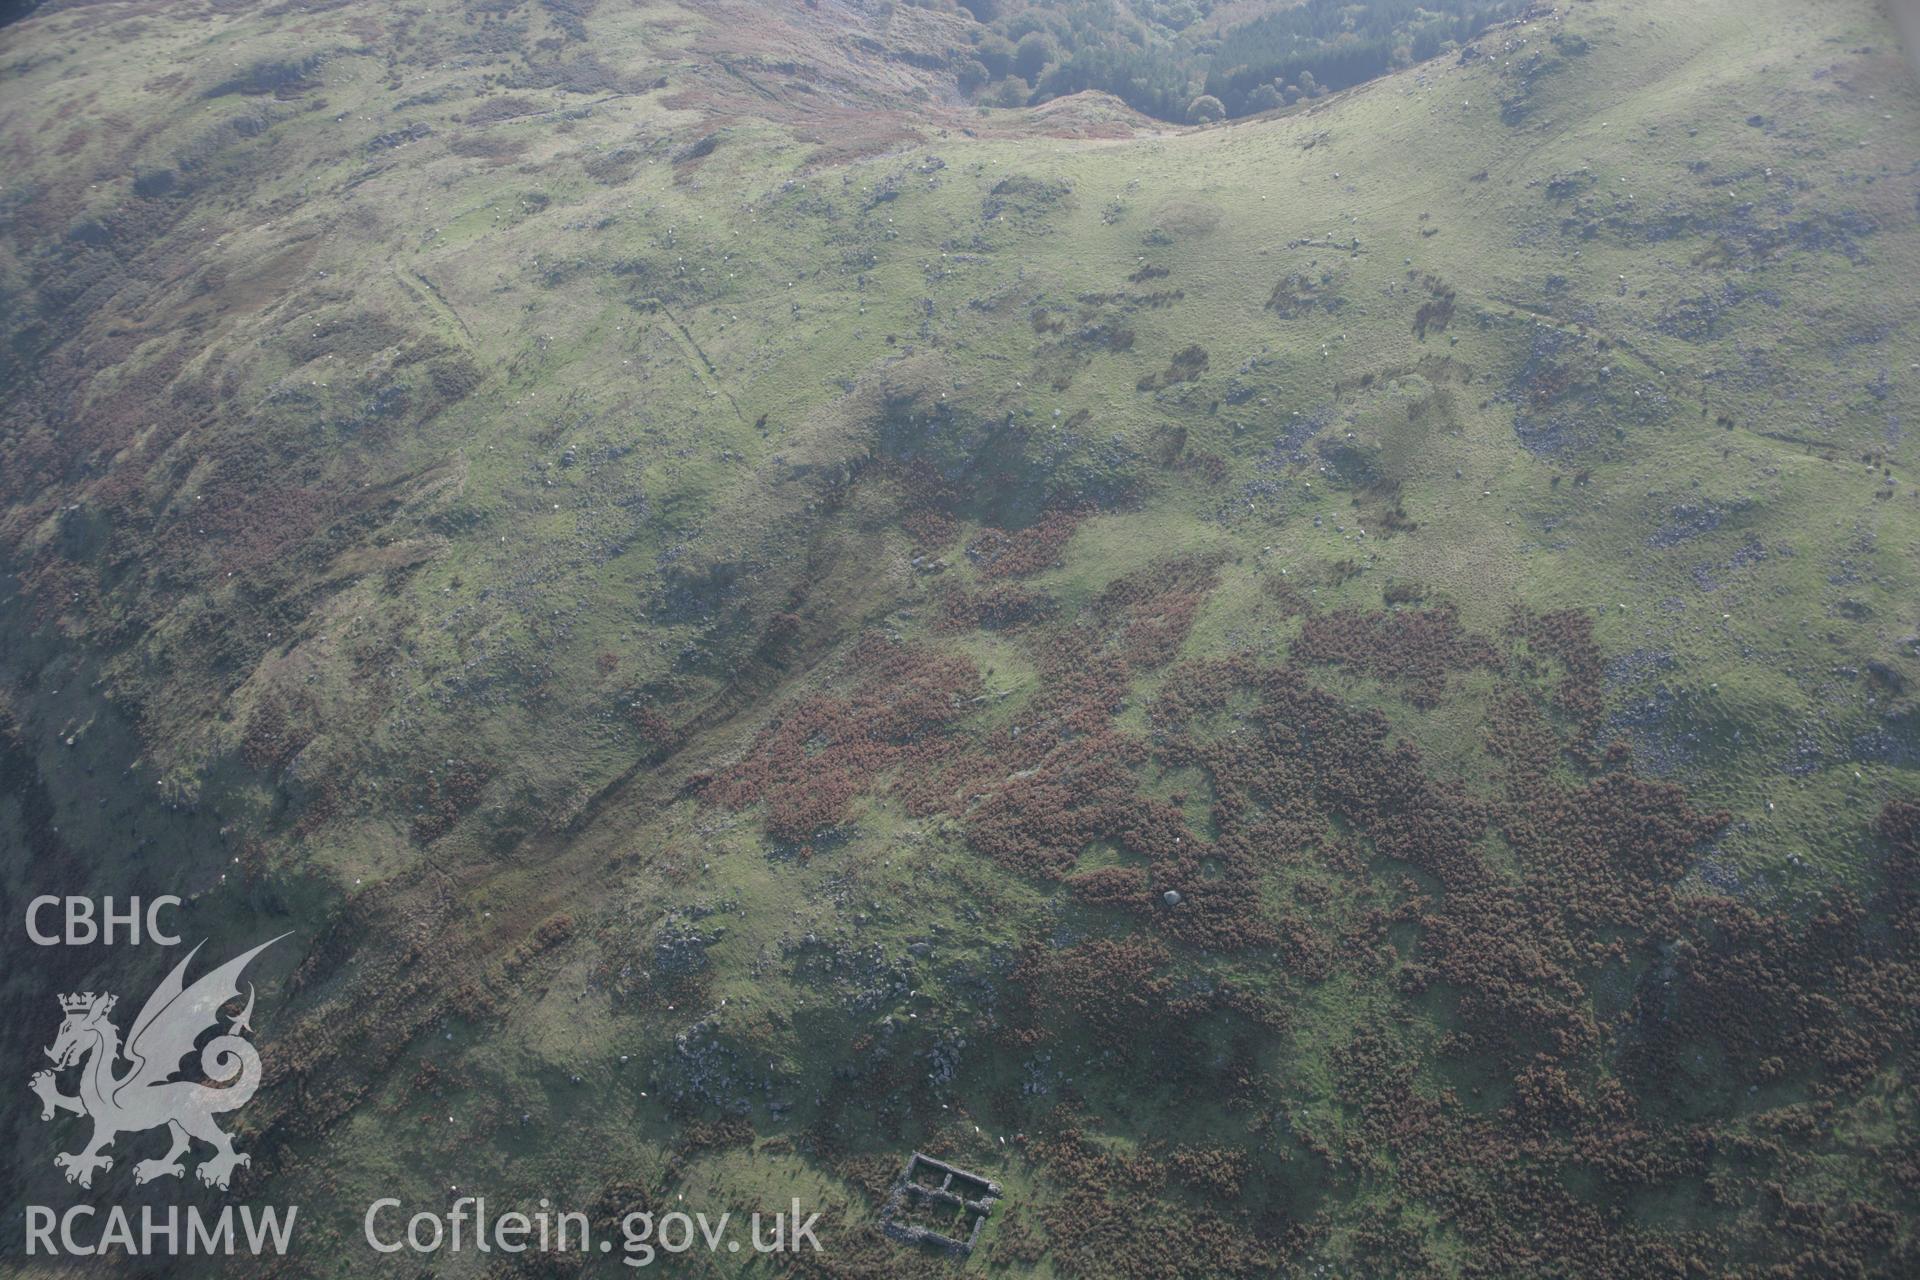 RCAHMW colour oblique aerial photograph of Craig Tyn-y-Cornel Settlement. Taken on 17 October 2005 by Toby Driver